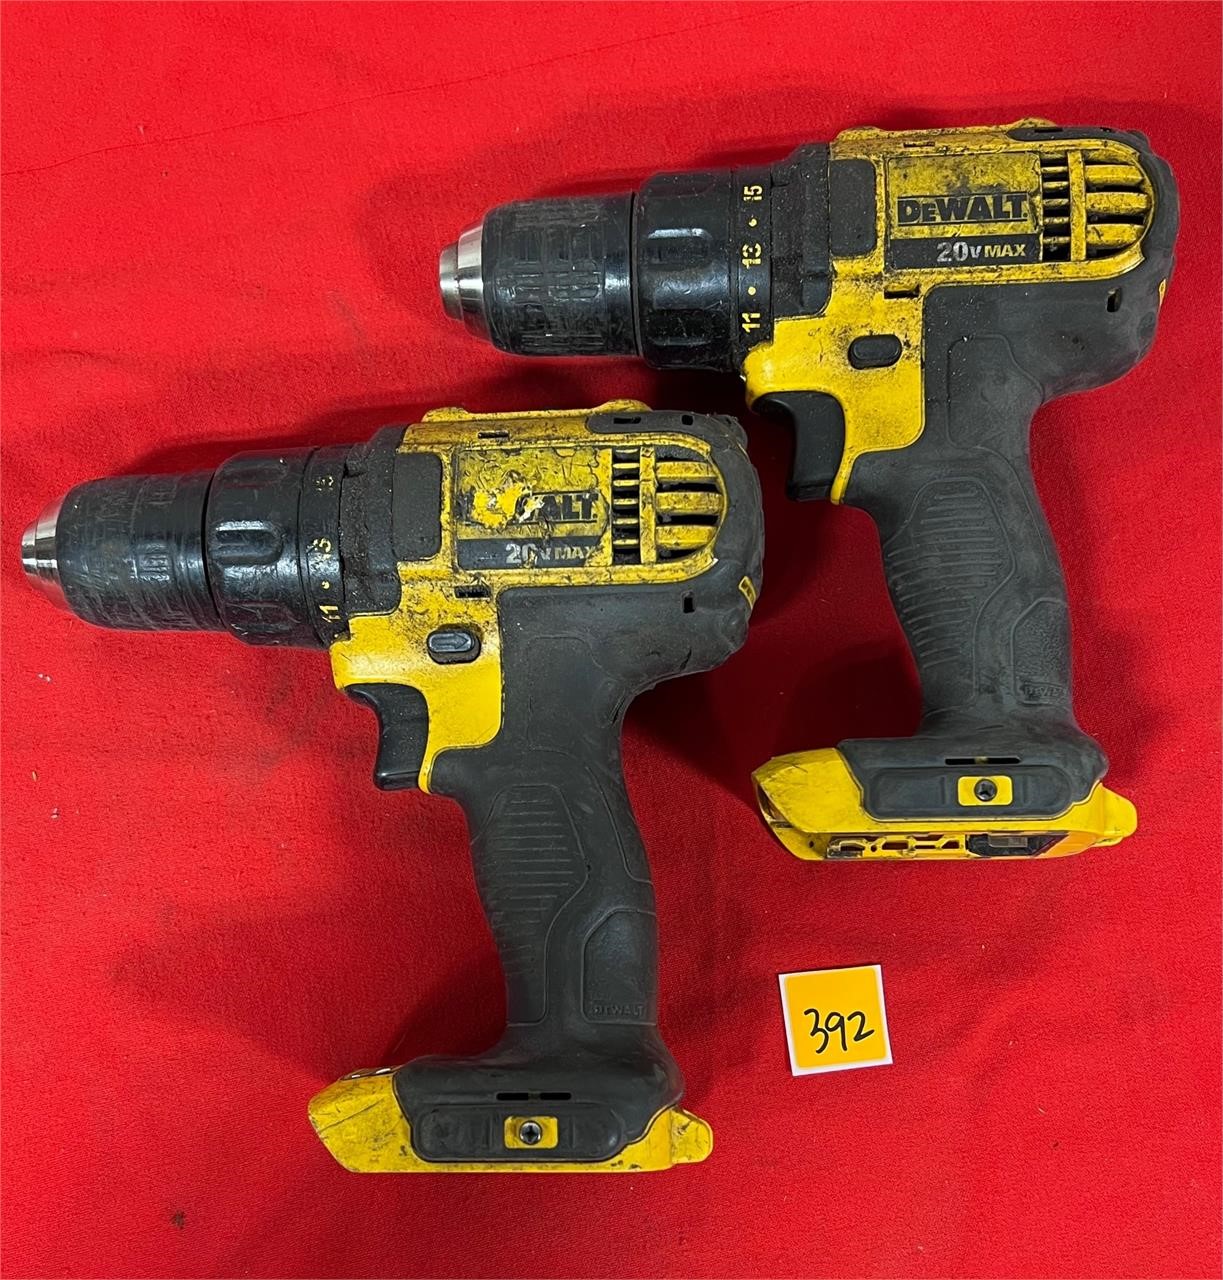 DEWALT Cordless Drill Driver-no battery, tested